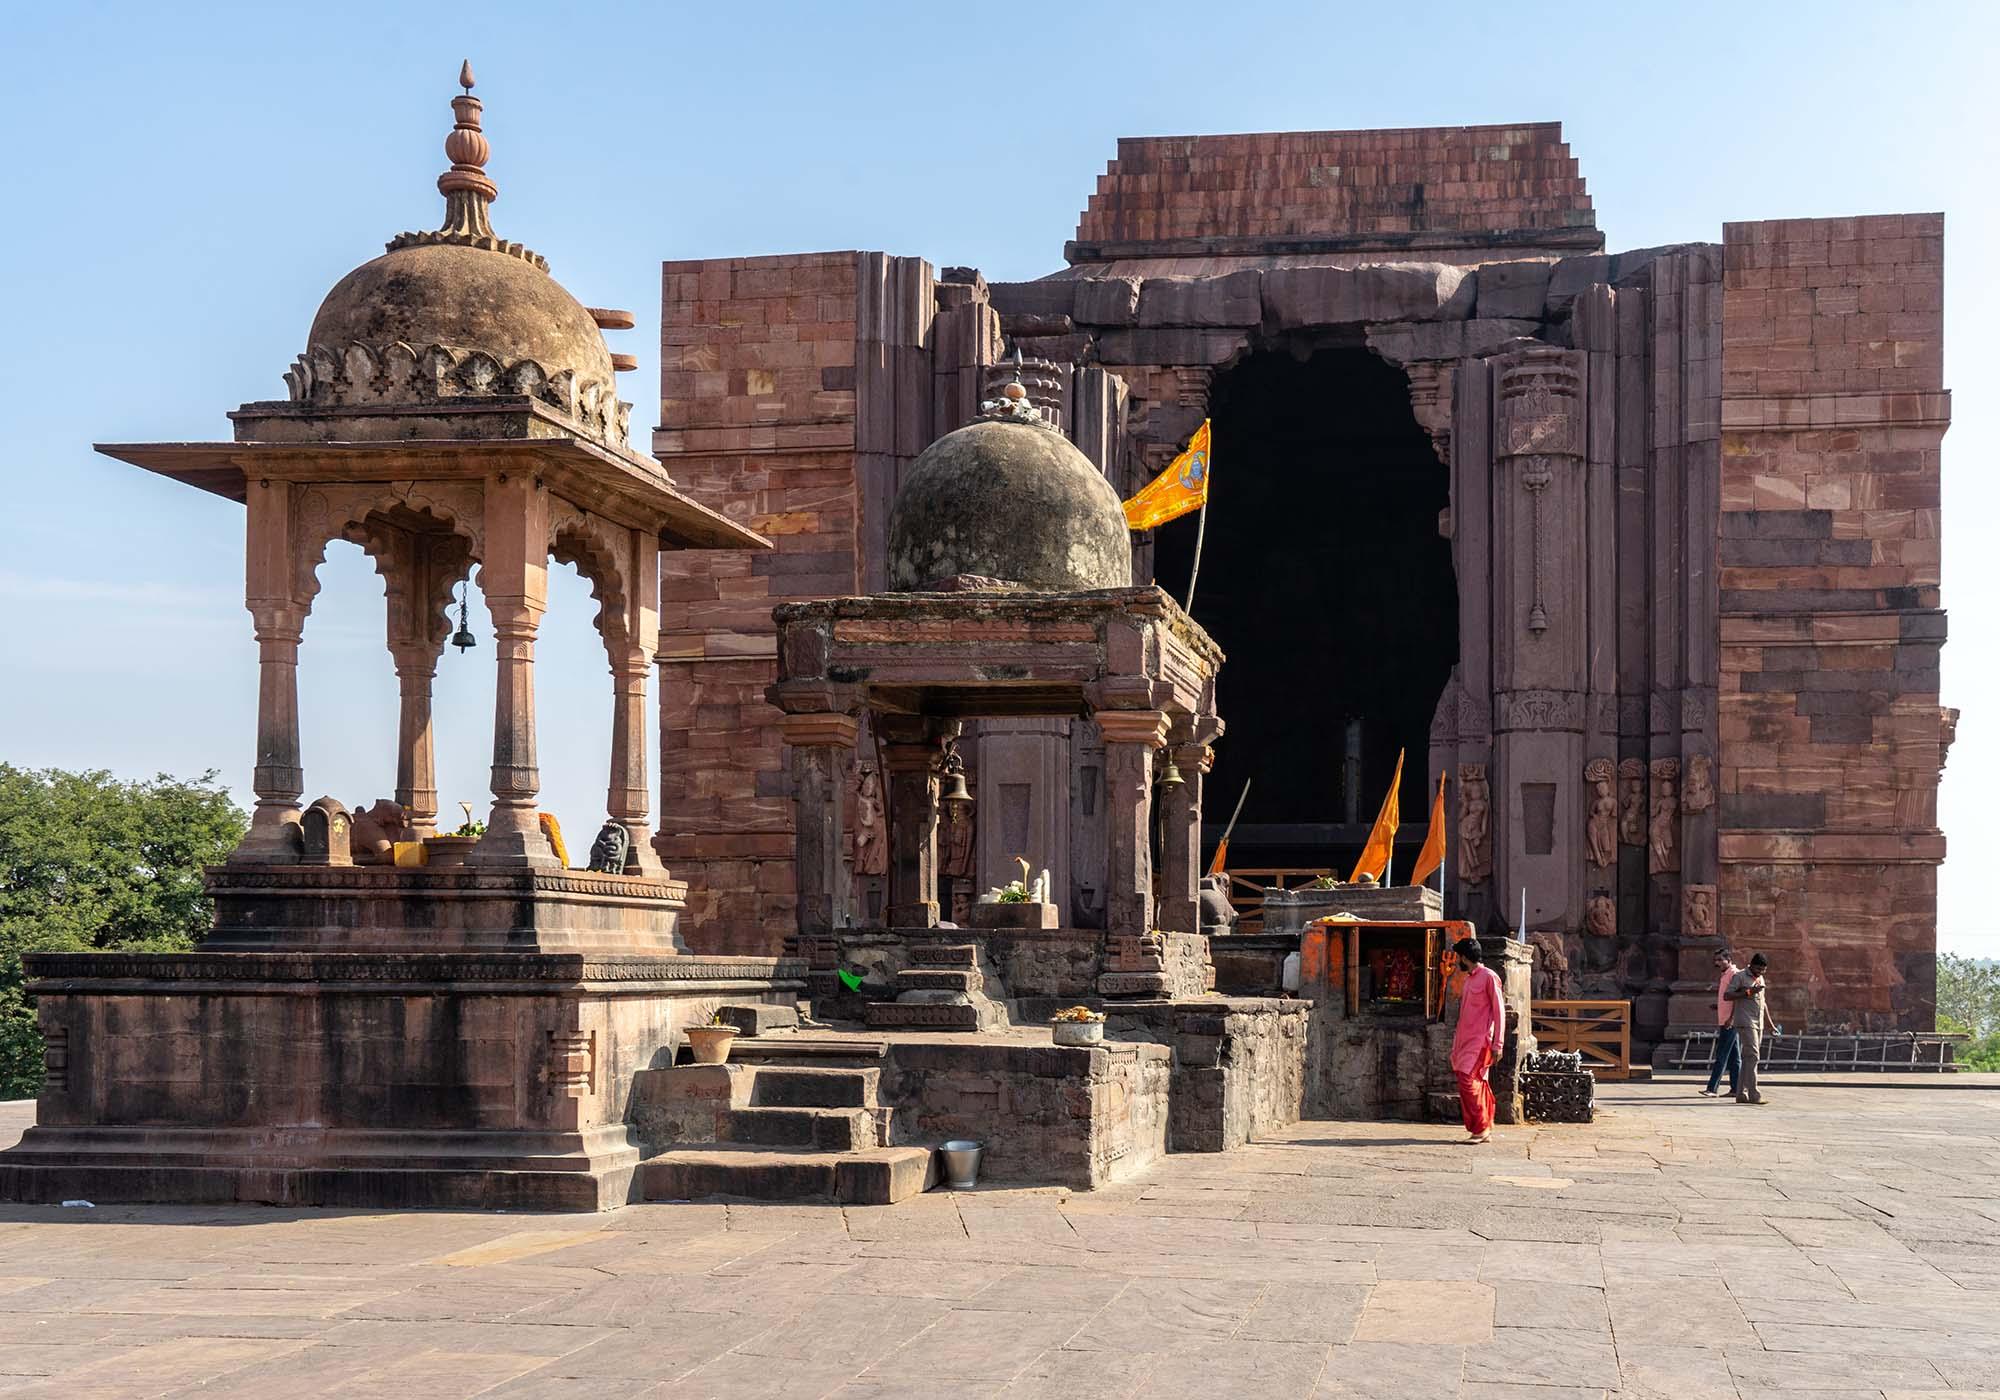 The Bhojeshwar Temple at Bhojpur was built in the 12th century and is one of the finest Hindu temples in the region. – © Michael Turtle